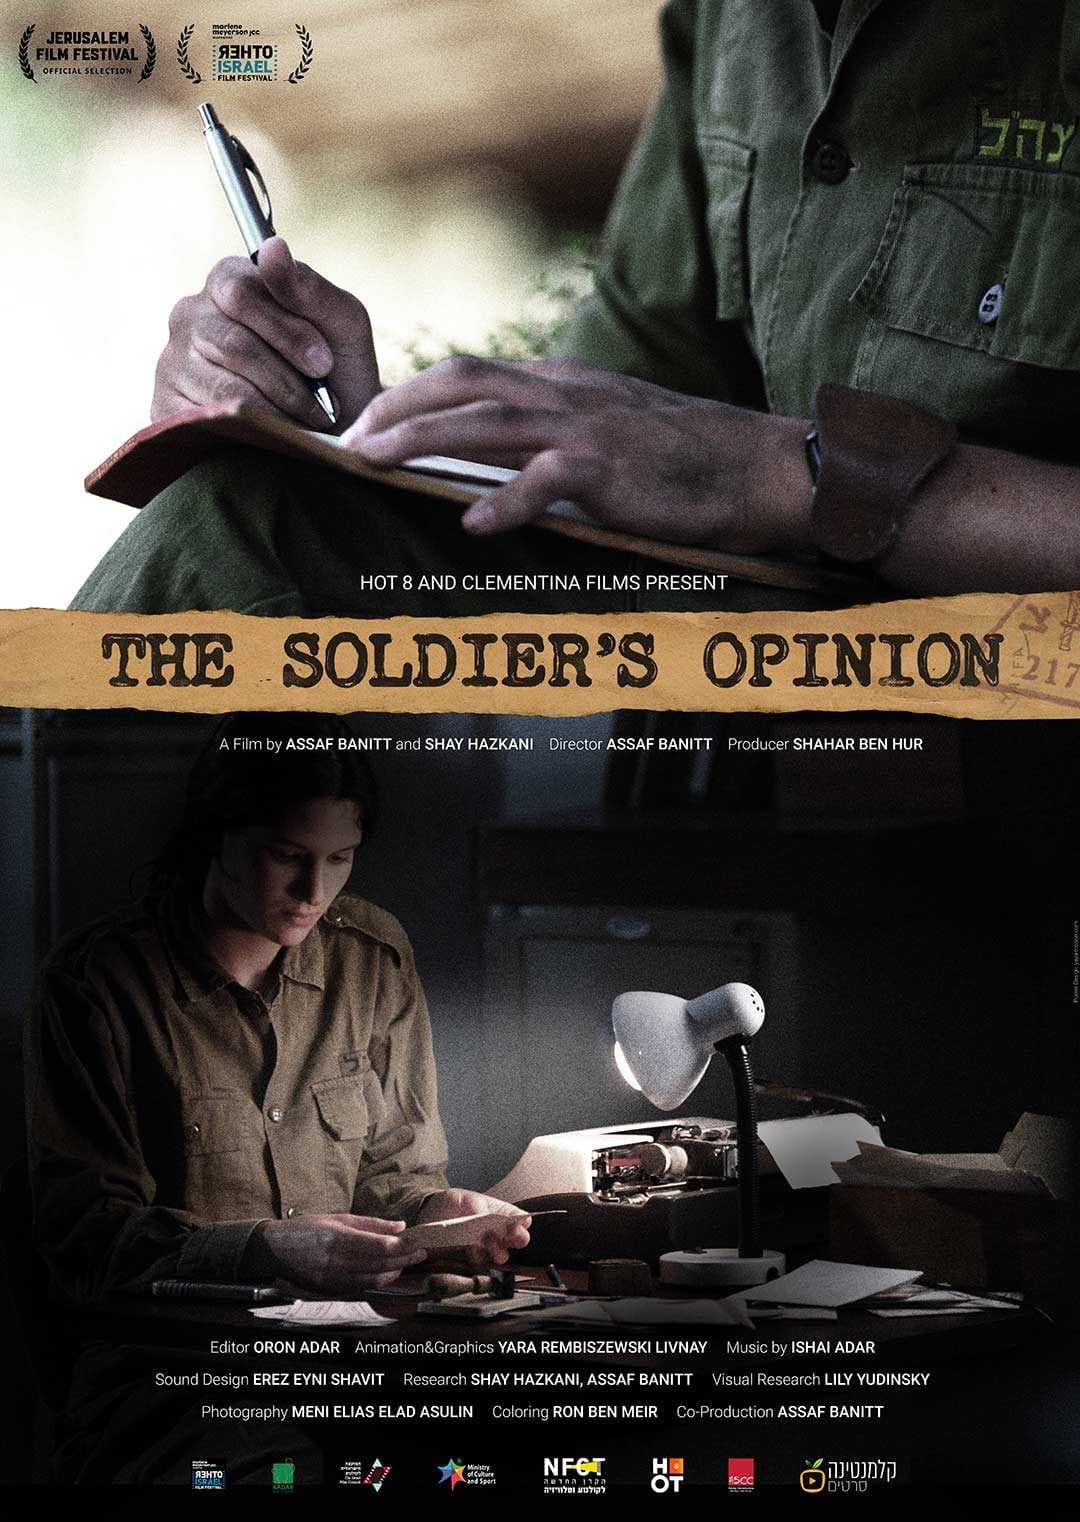 "The Soldier's Opinion" poster